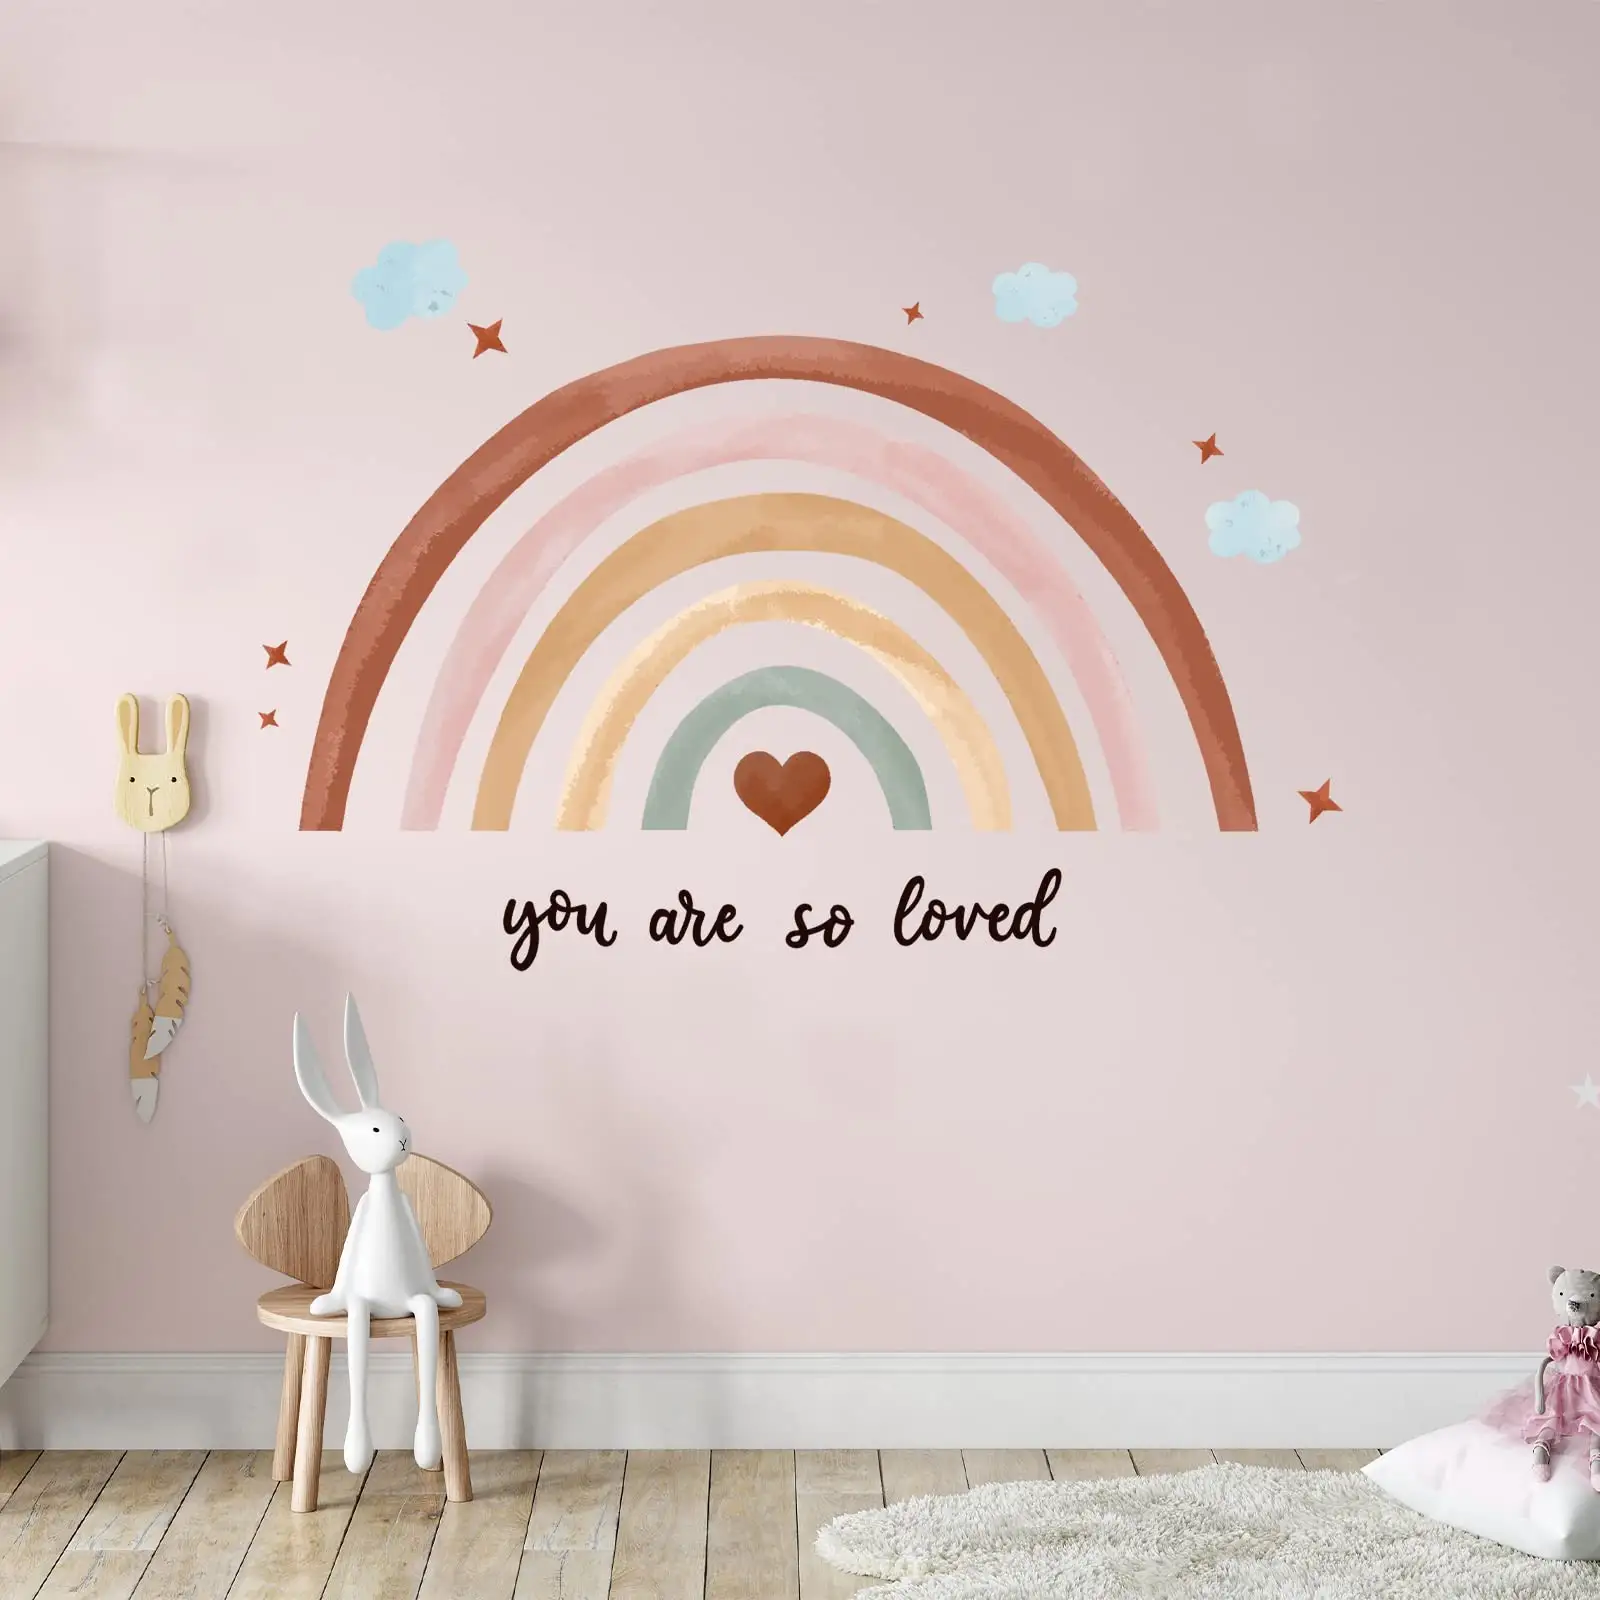 New Design Cartoon Rainbow Wall Decals 3D PVC Rainbow Sticker Removable Home Decoration Wall Decal